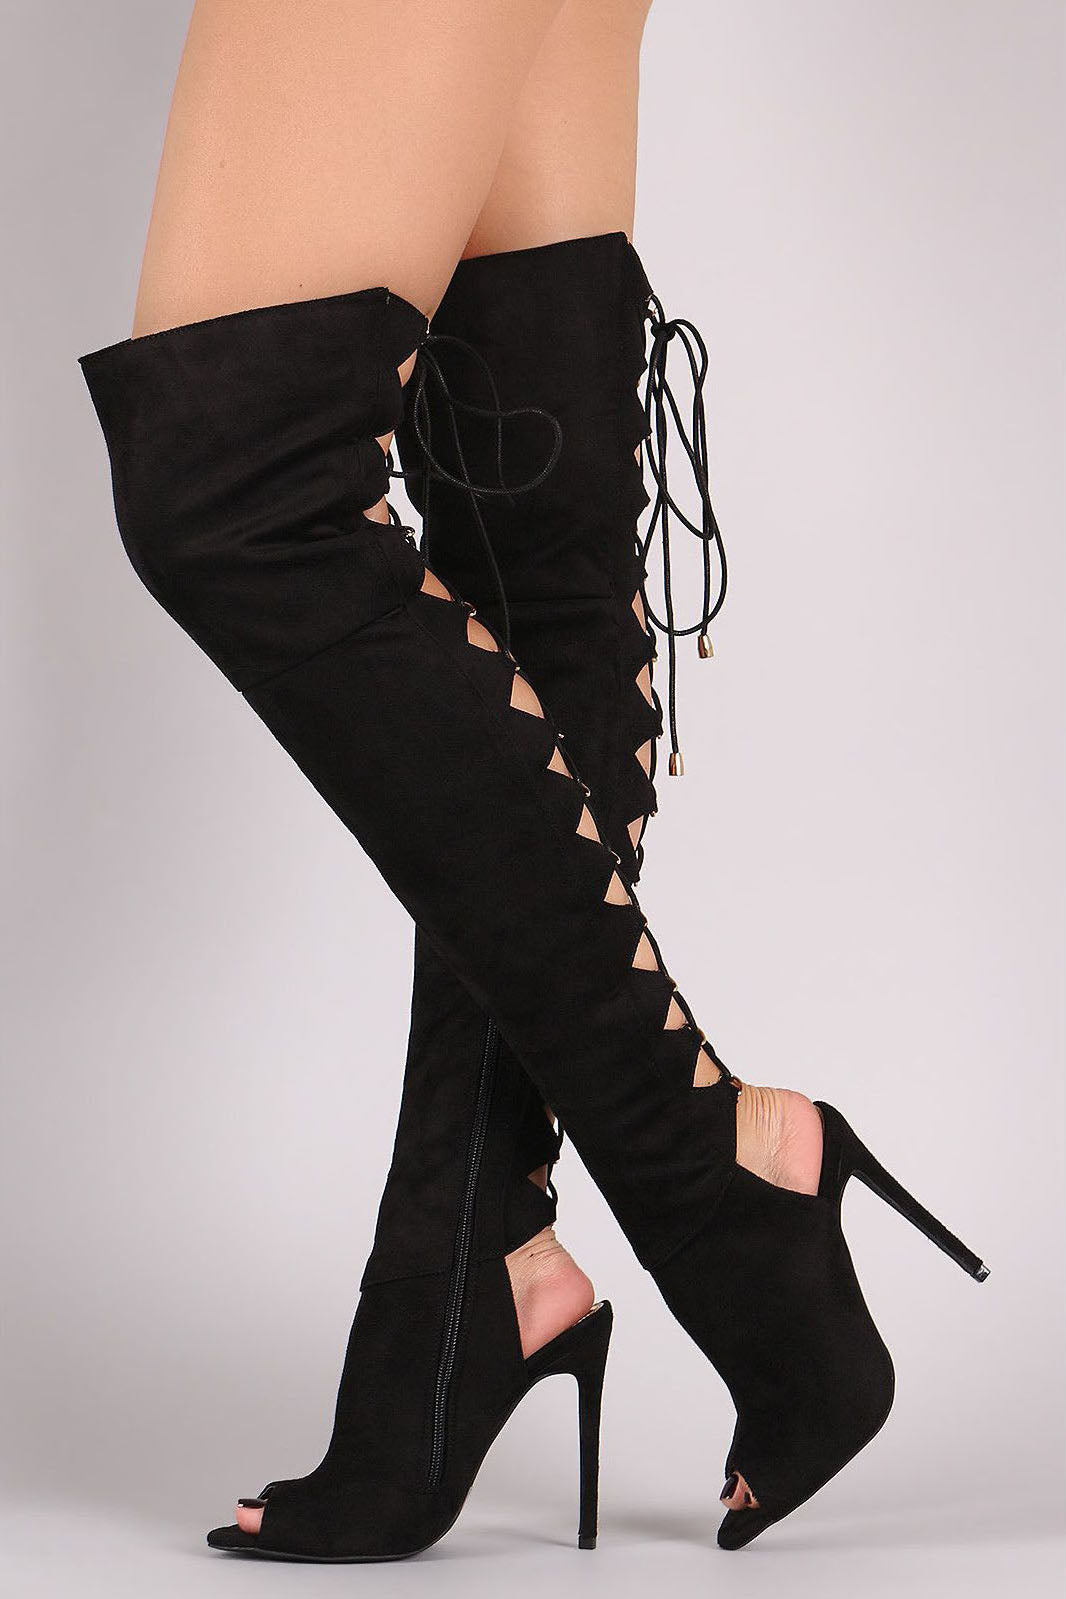 Back Lace Up Cut Out Peep Toe Over-knee Long Boot Sandals